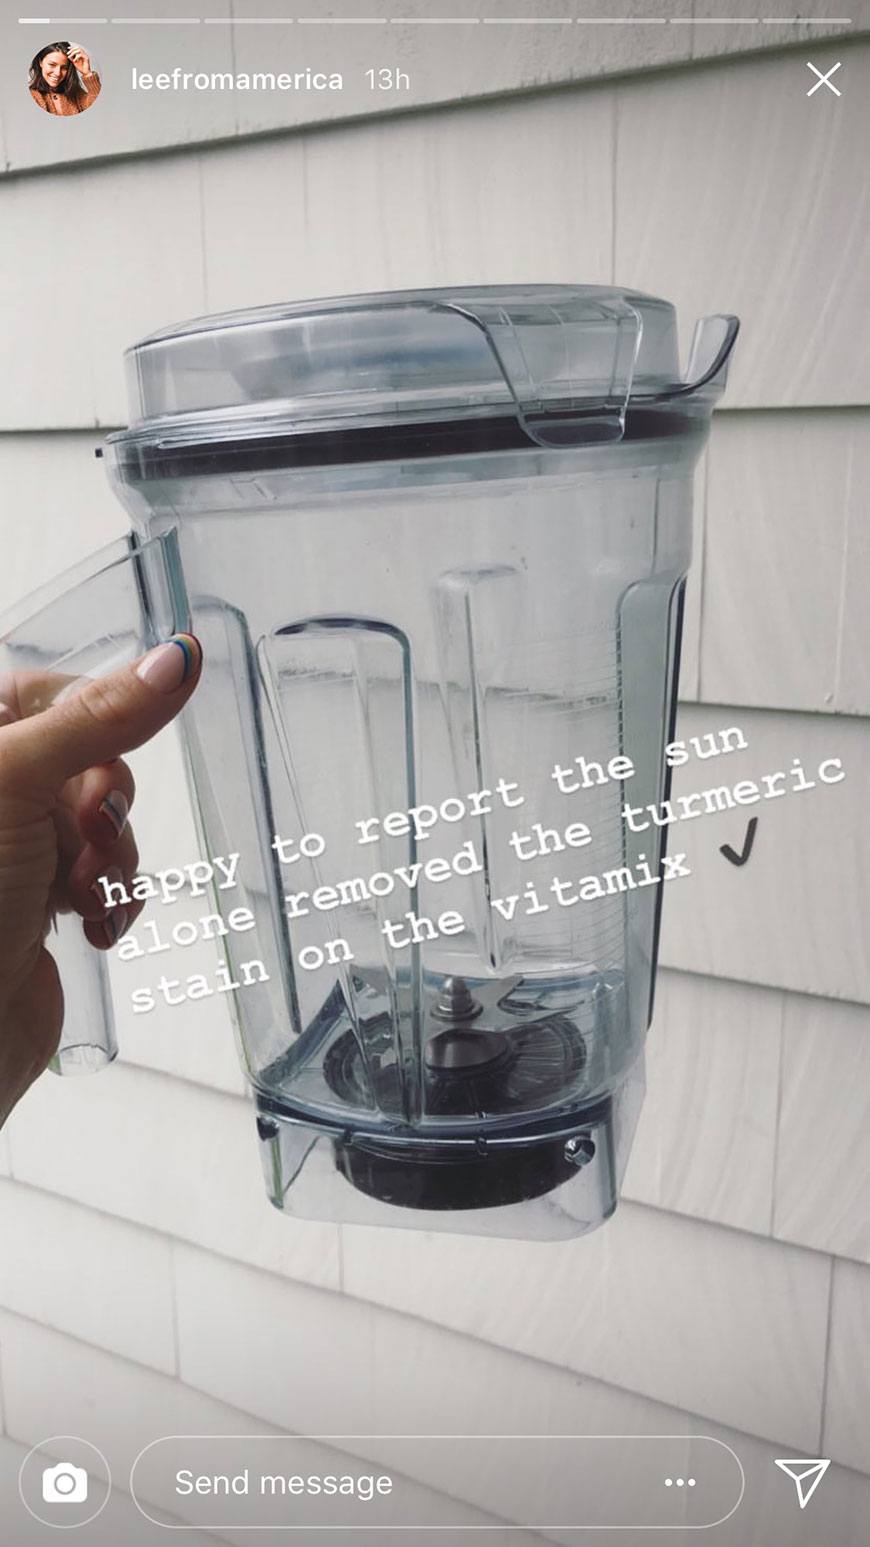 The easy way to finally get those yellow turmeric stains out of your blender